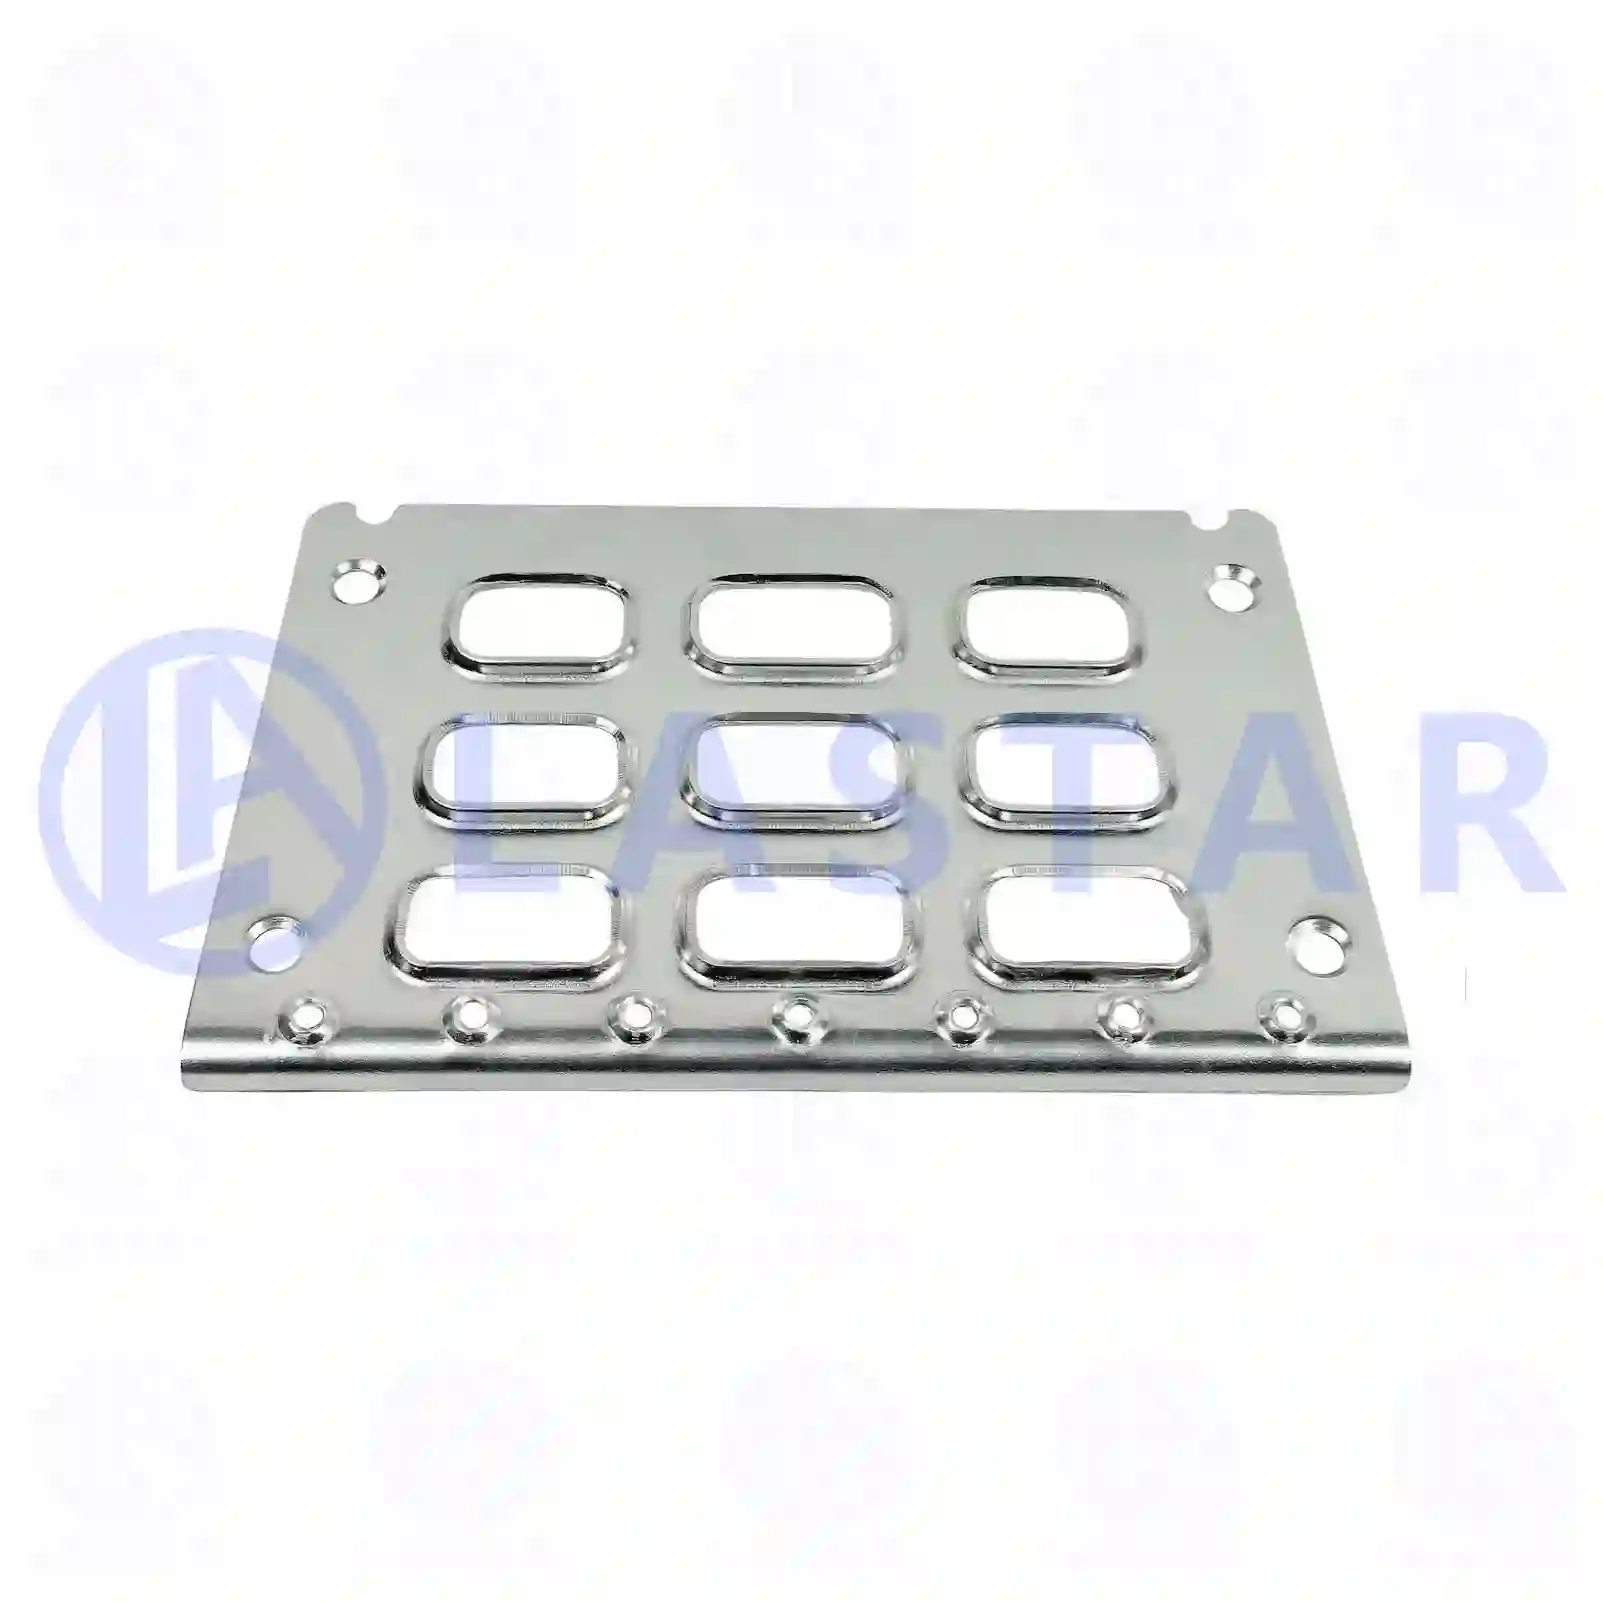 Step, 77720613, 20379437, 8191103, 8191313, ZG61124-0008 ||  77720613 Lastar Spare Part | Truck Spare Parts, Auotomotive Spare Parts Step, 77720613, 20379437, 8191103, 8191313, ZG61124-0008 ||  77720613 Lastar Spare Part | Truck Spare Parts, Auotomotive Spare Parts